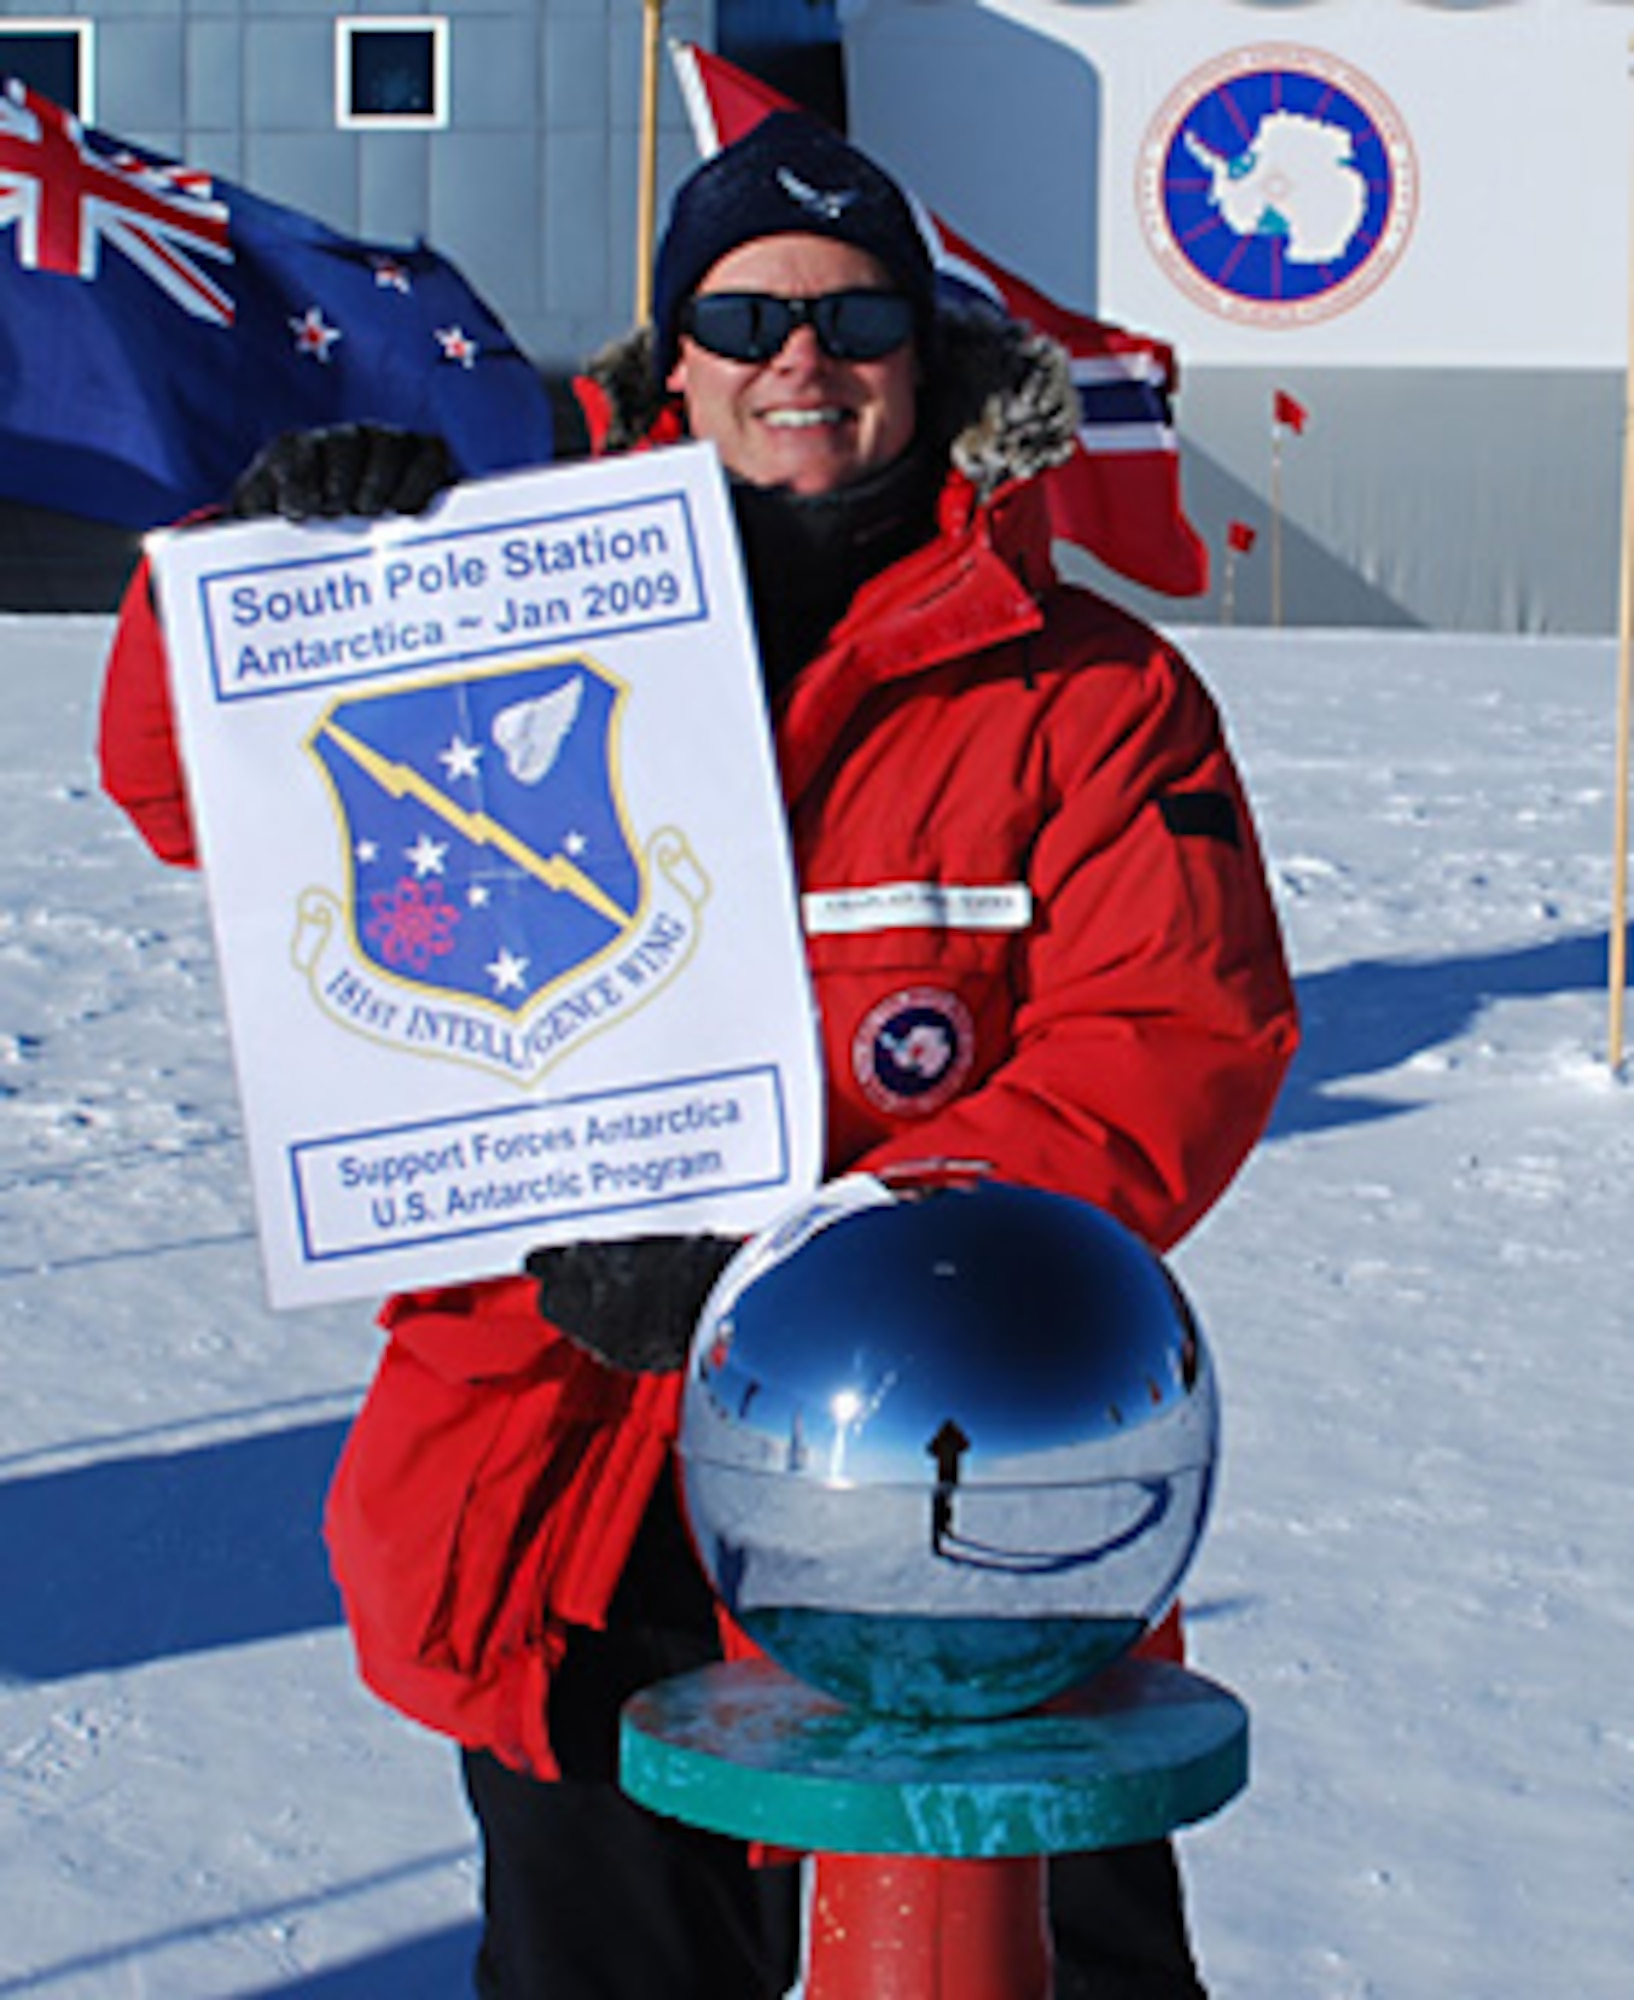 Lt. Col. William Yates proudly displays the 181st Intelligence Wing Patch at the South Pole.